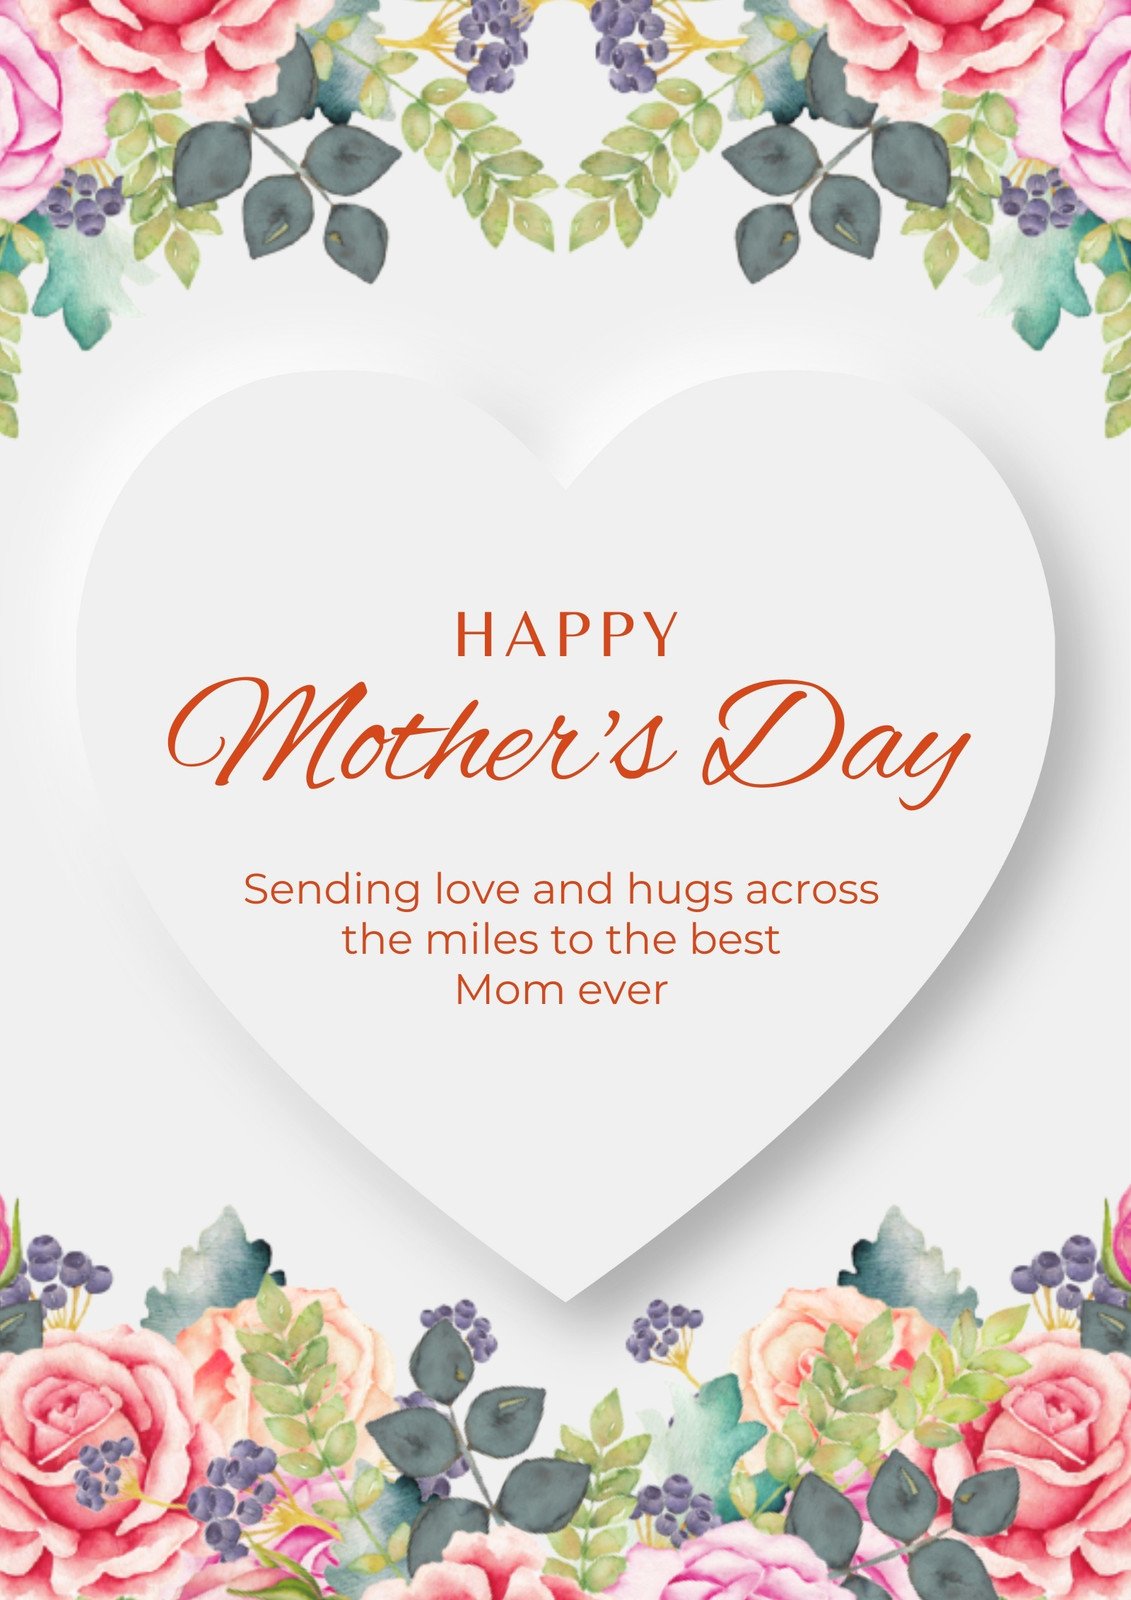 Free custom printable Mother's Day poster templates | Canva